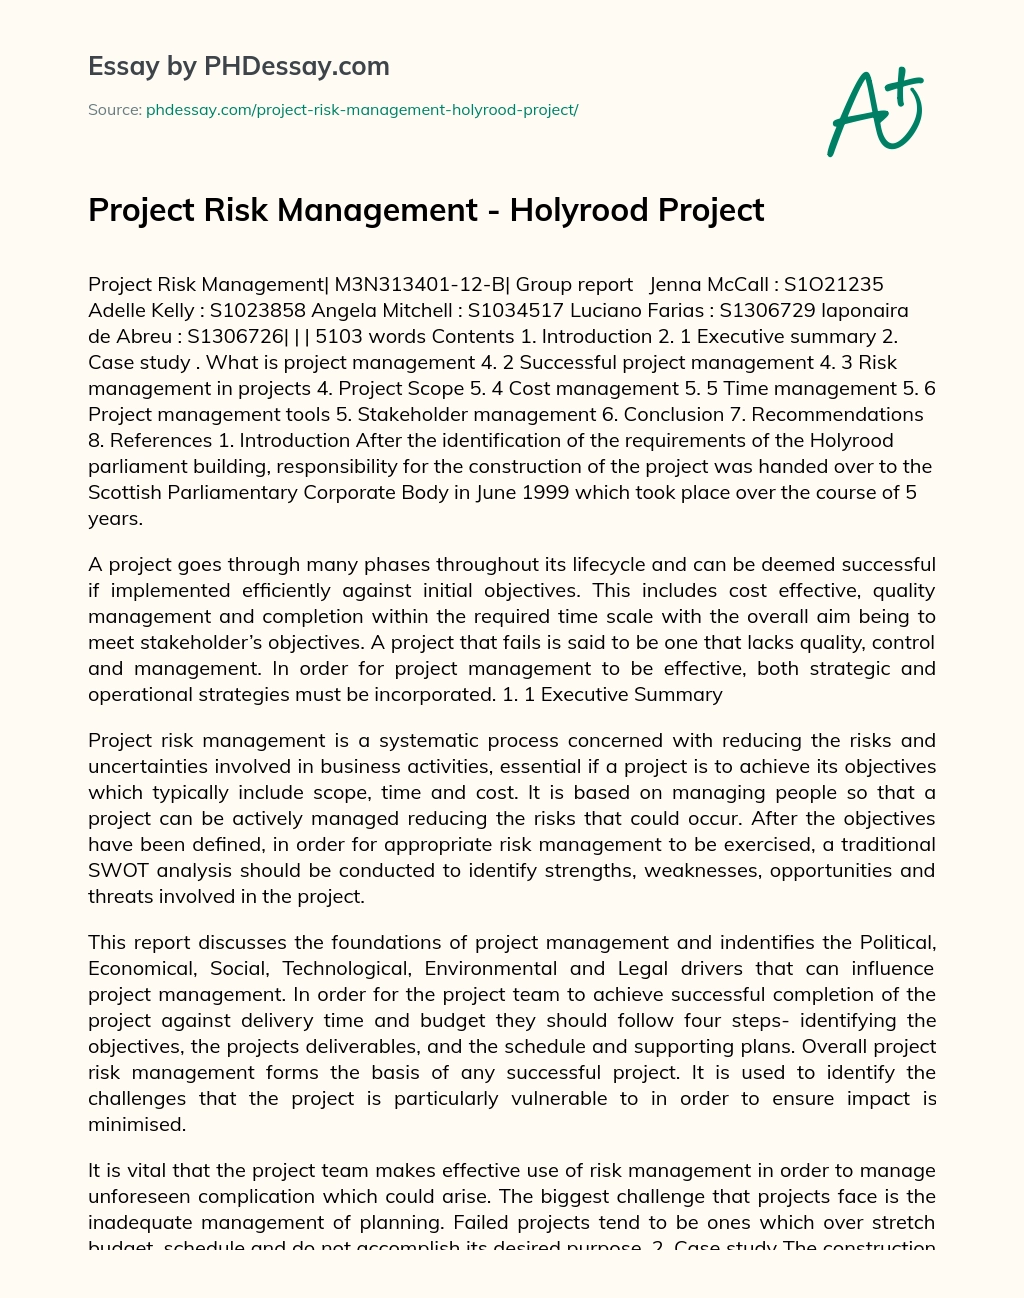 Project Risk Management – Holyrood Project essay